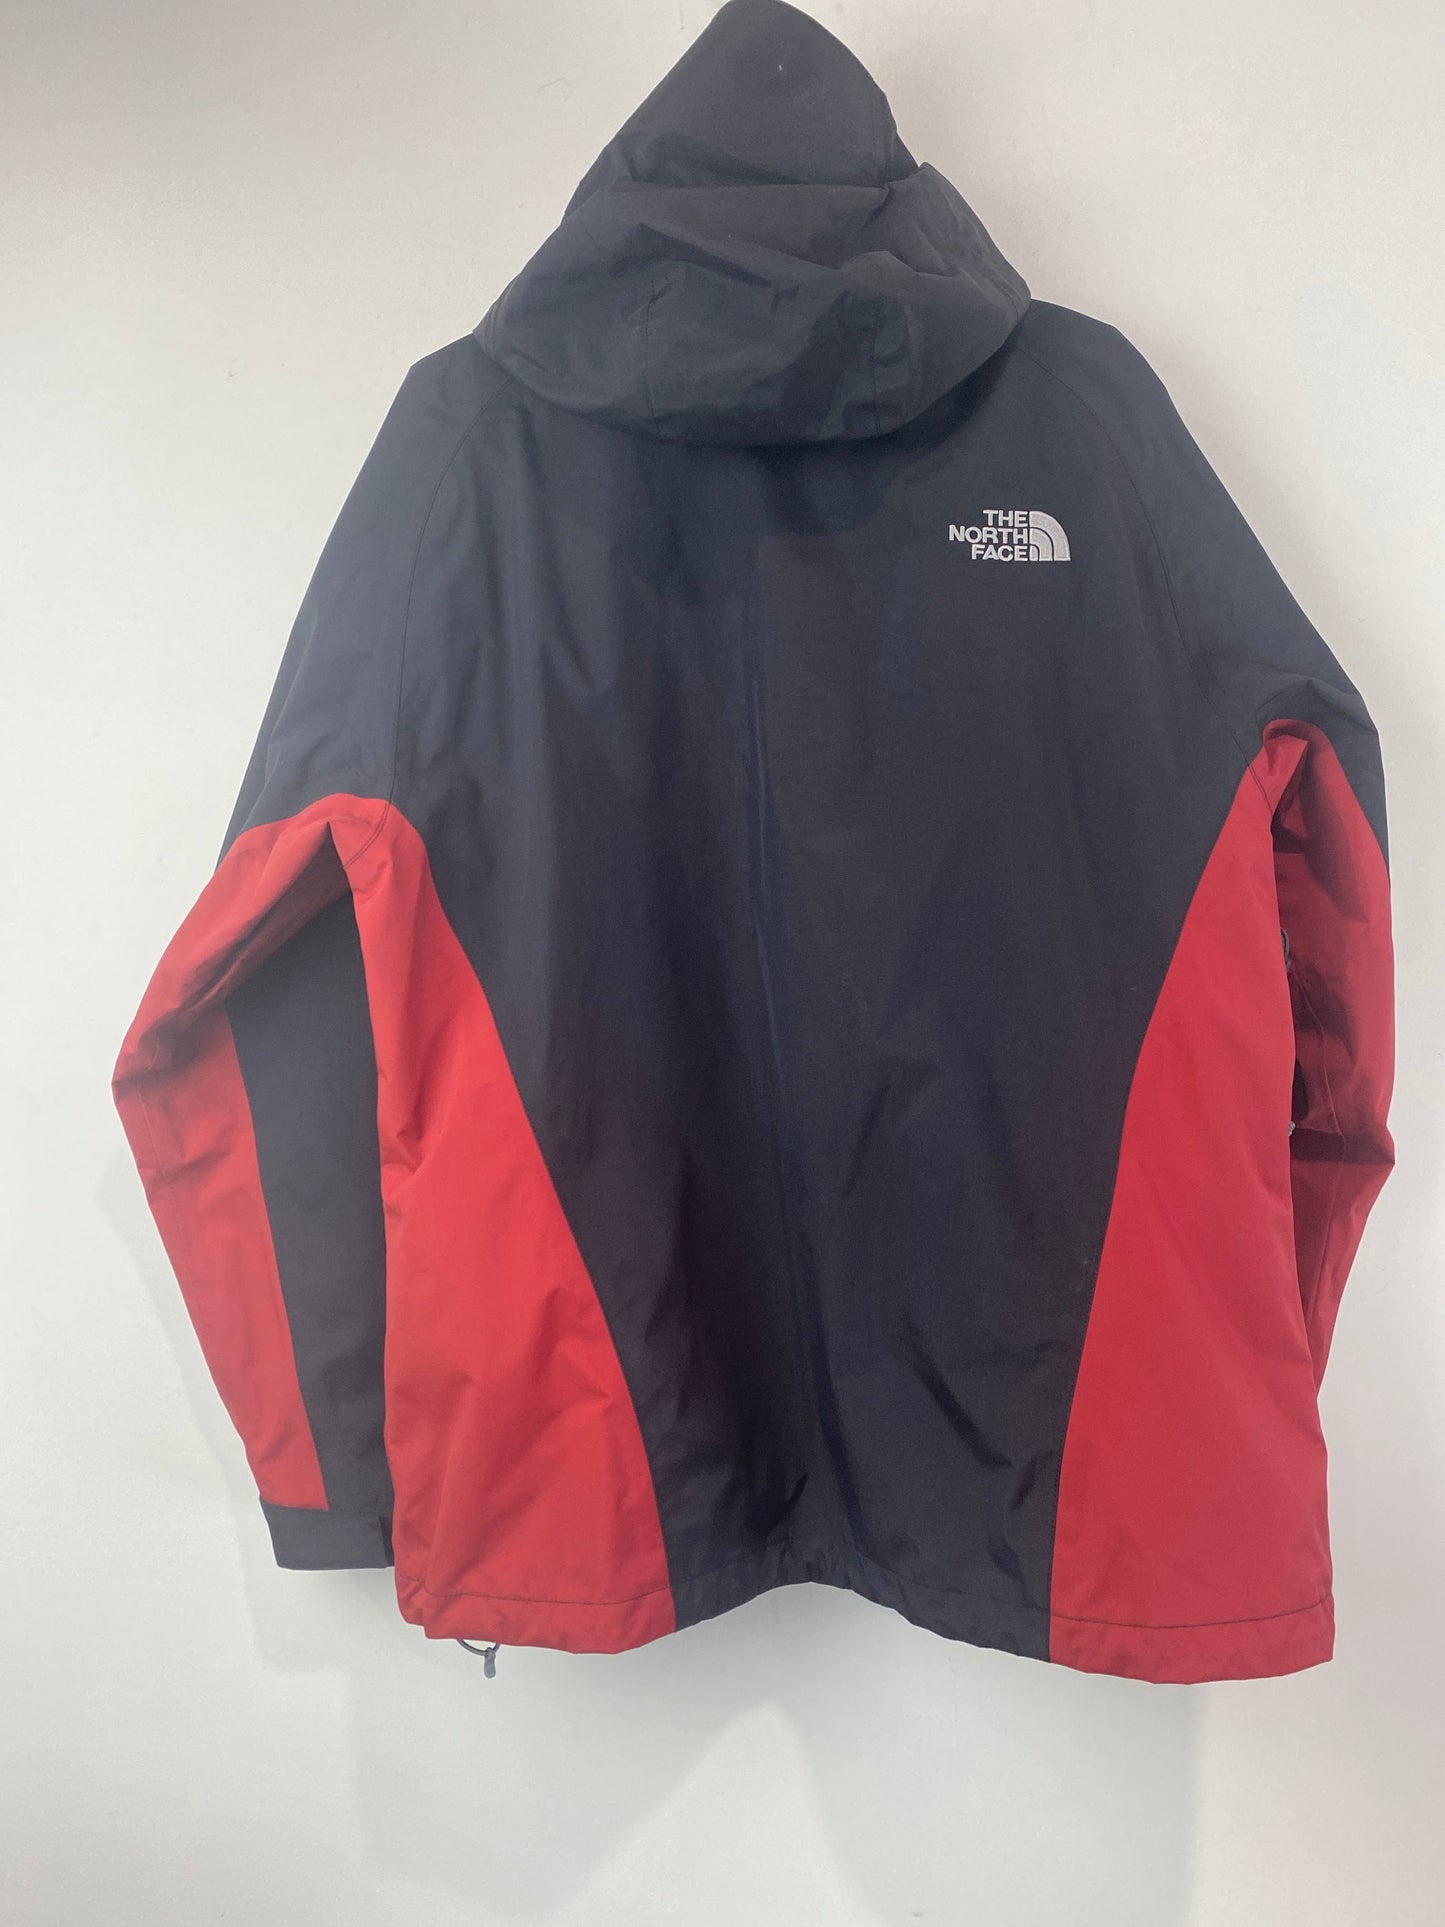 Jacket Other By The North Face  Size: L